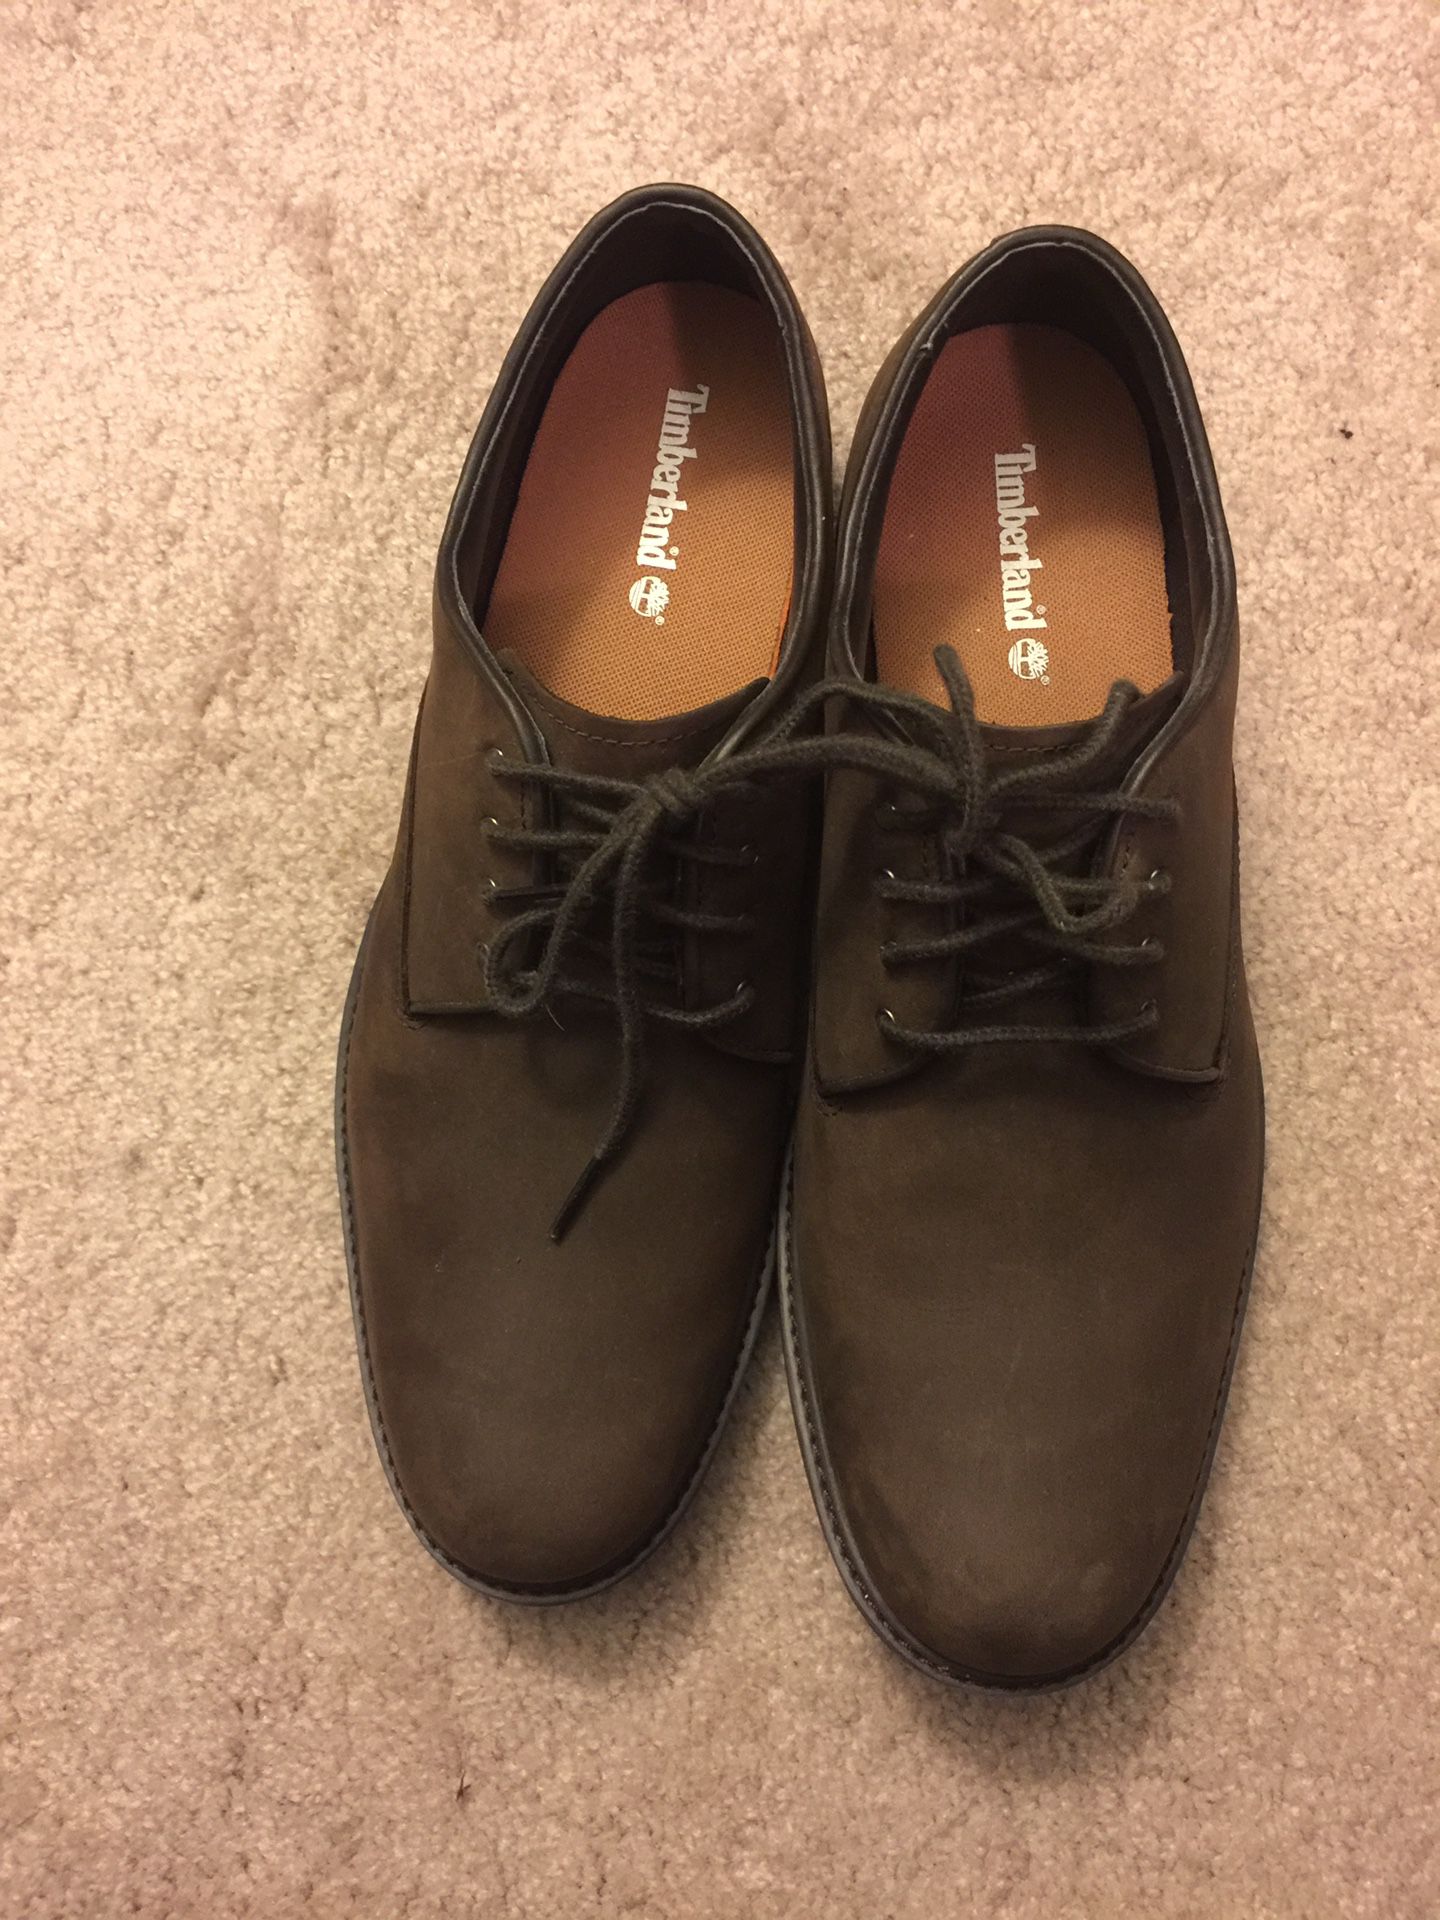 New Timberland shoes size 11 1/2